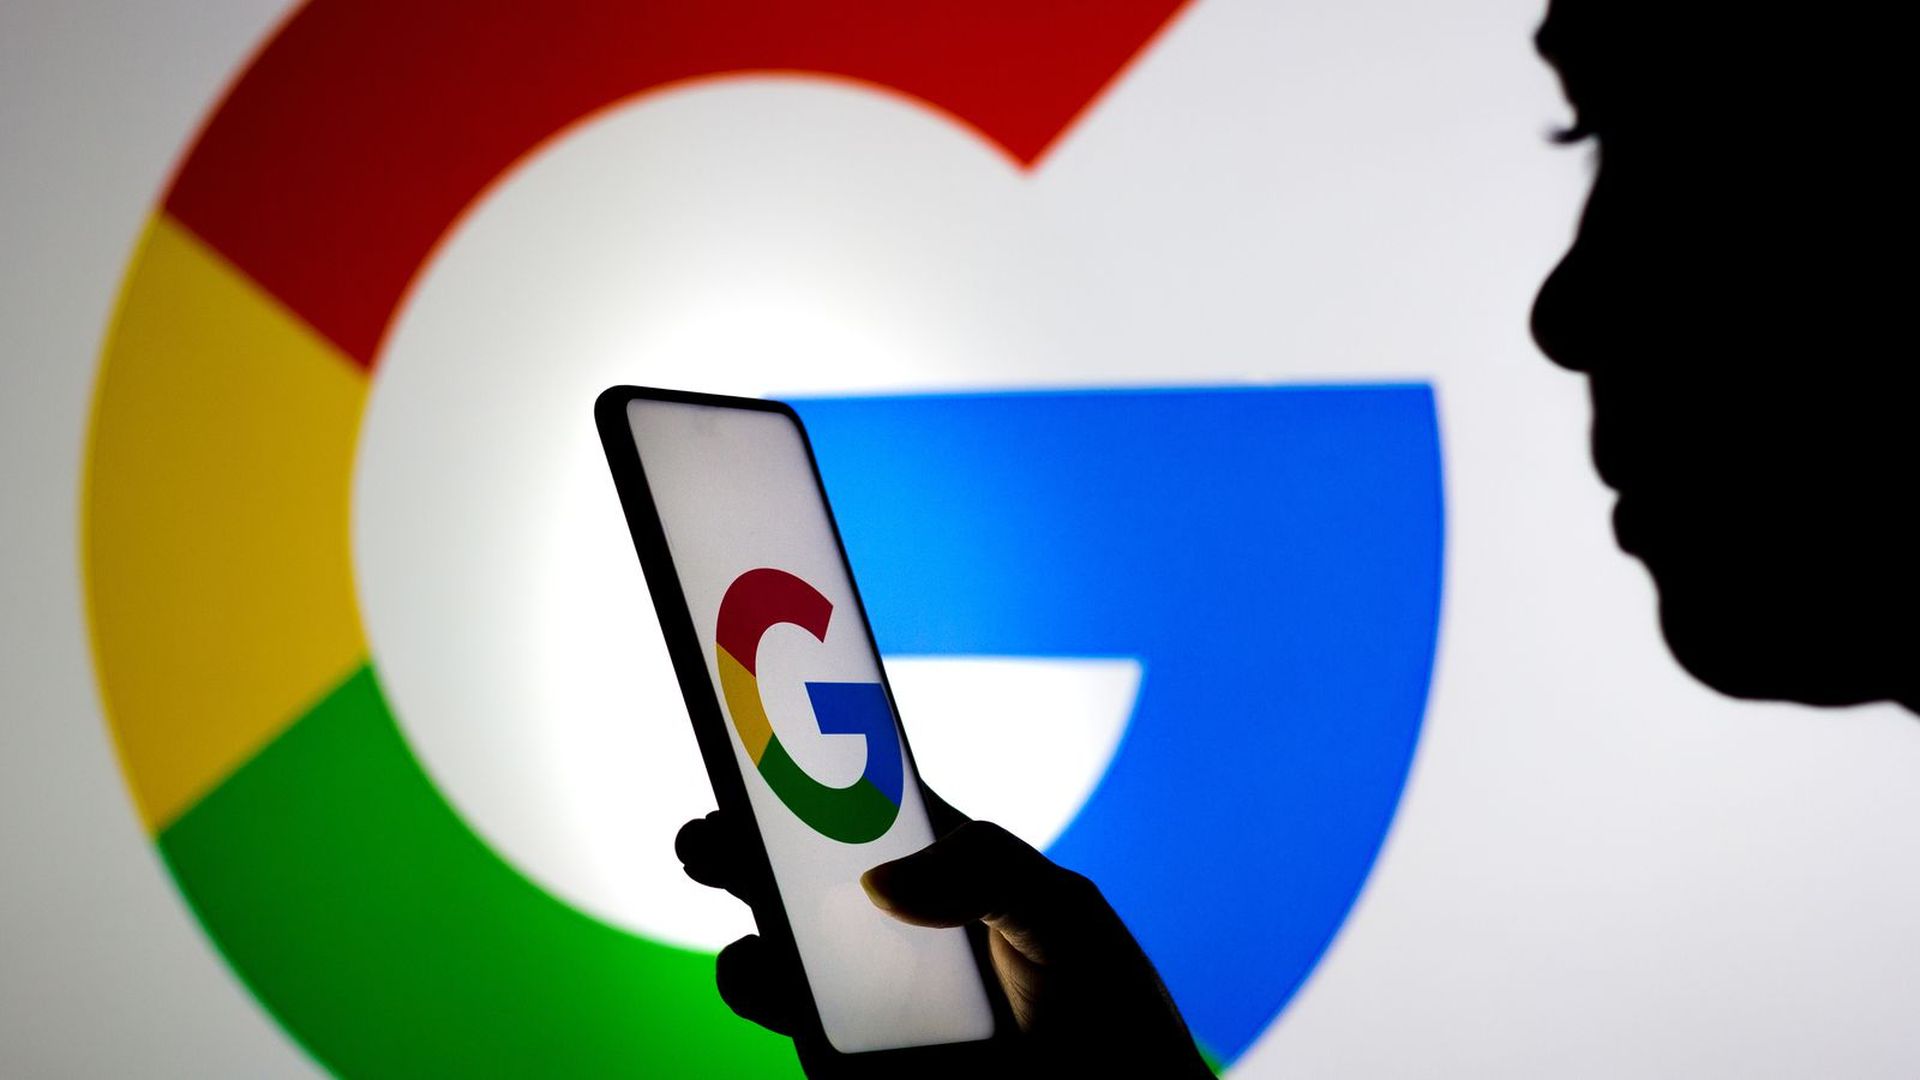 A photo illustration of a person using a smartphone with a Google logo against a background with another Google logo